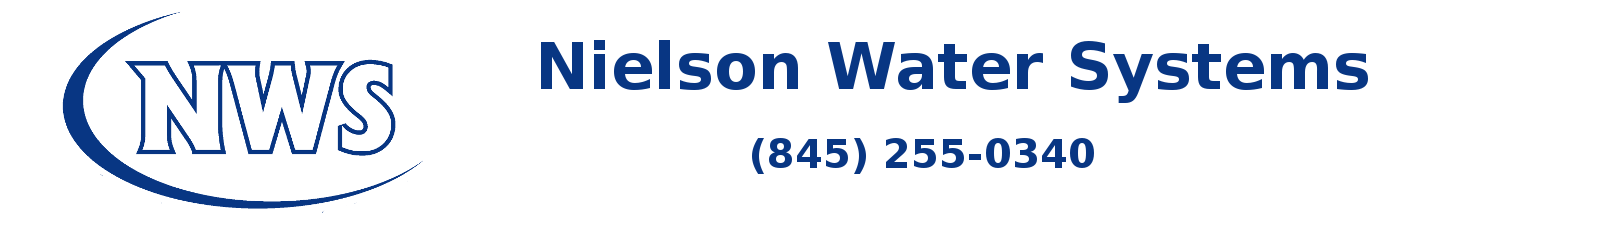 Nielson Water Systems